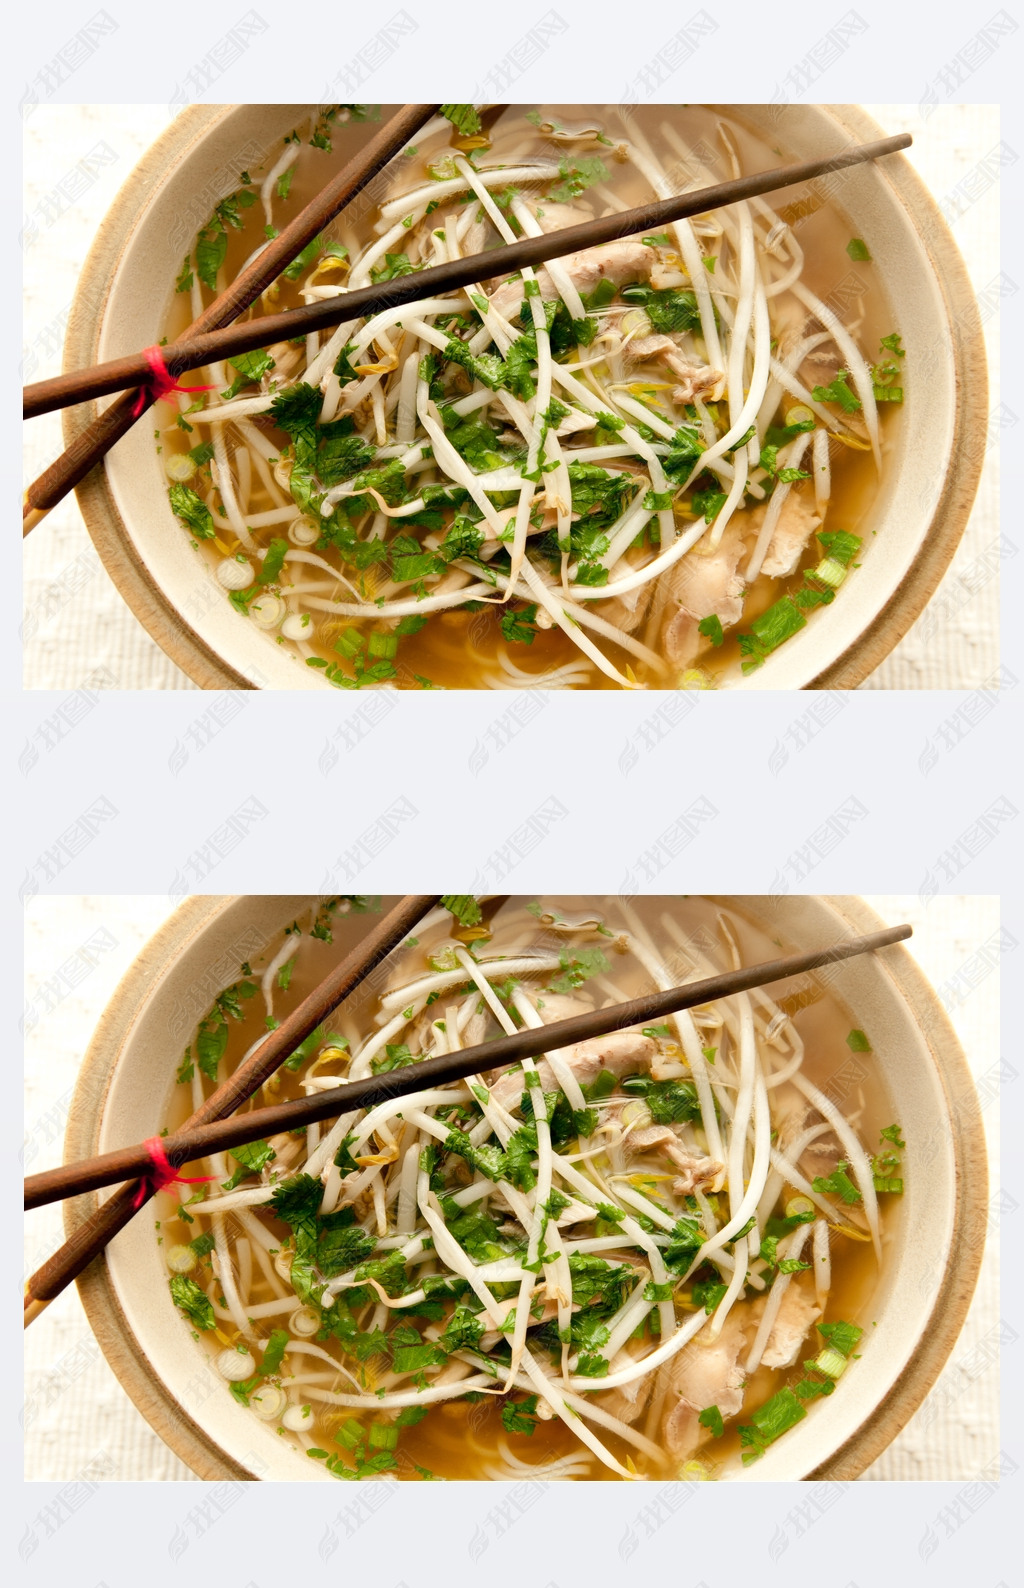 Vietnamese pho soup, an ethnic meal of chicken soup